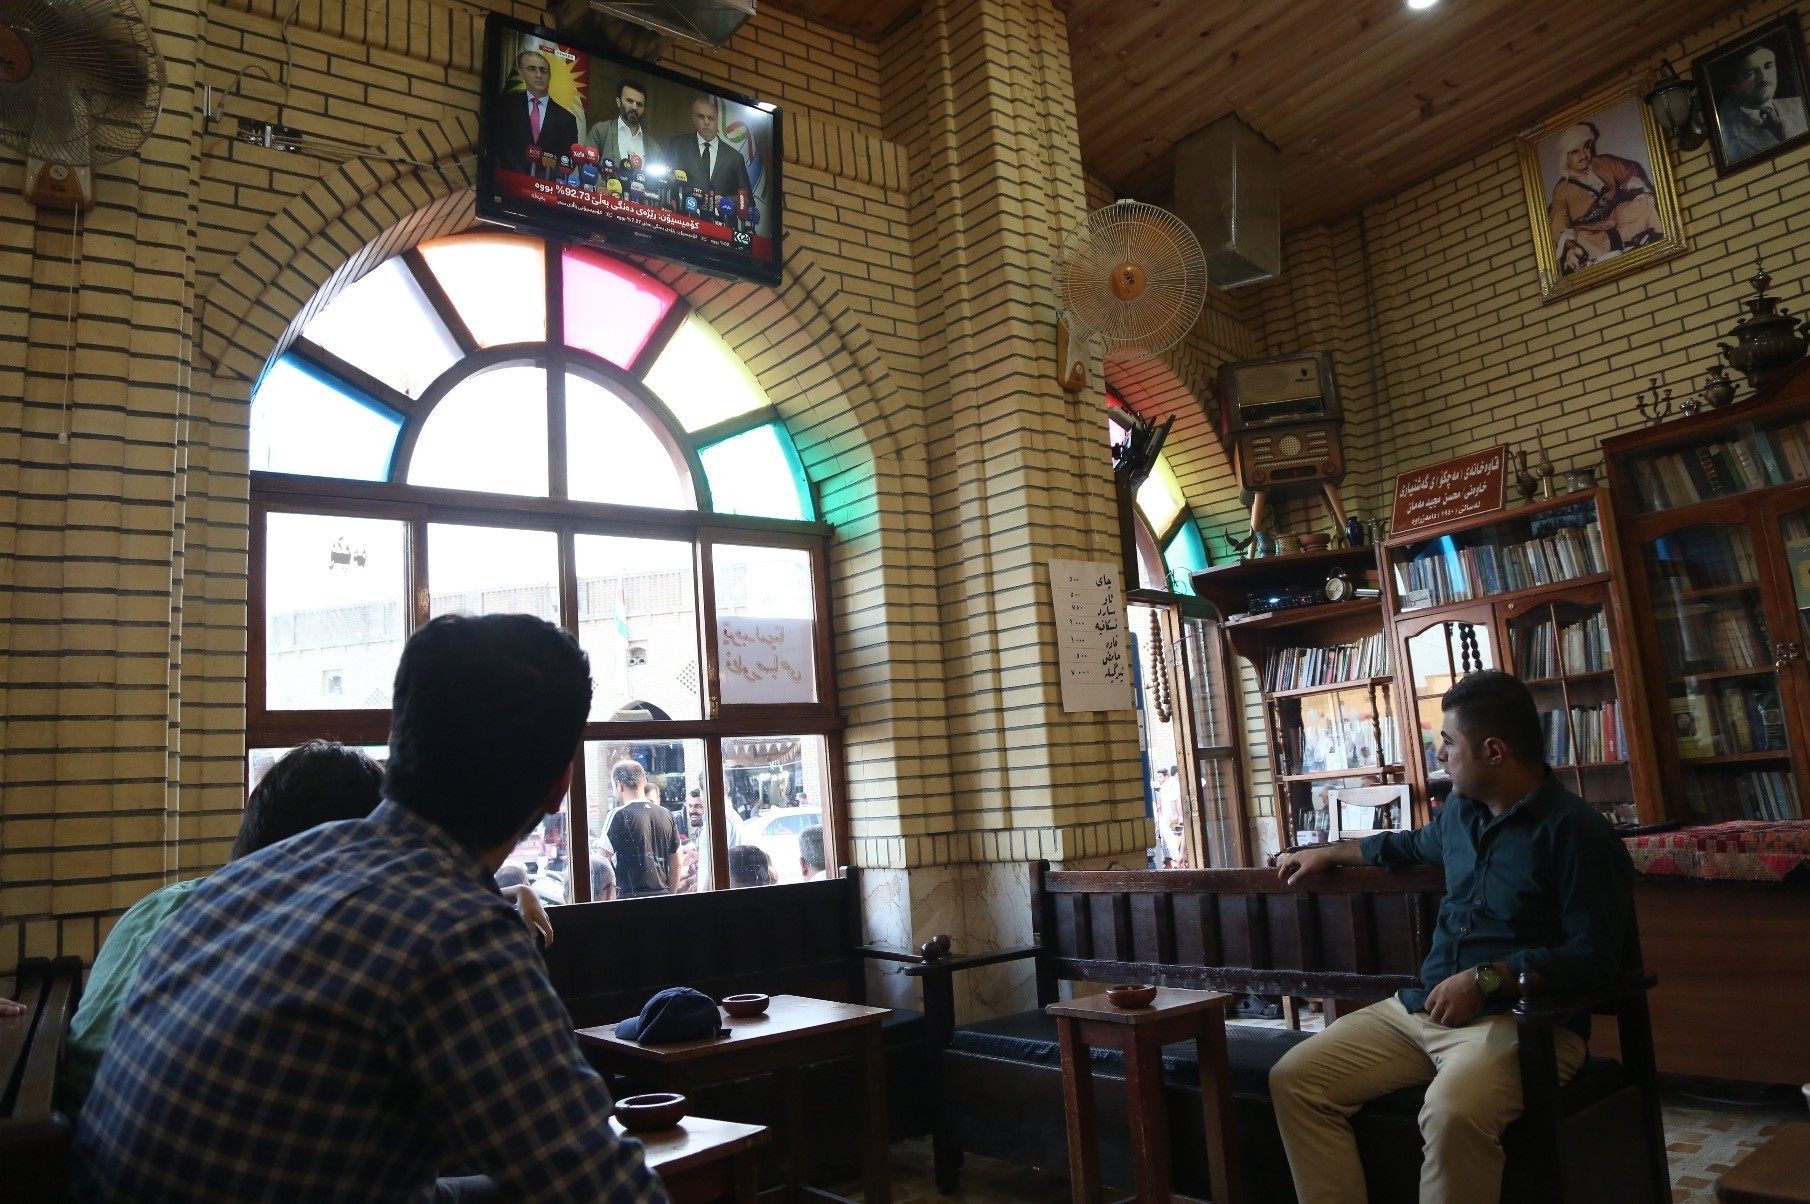 Kurdish people at a popular cafe in Irbil watch the press conference where the results of the KRG independence referendum are announced, Sept. 27.